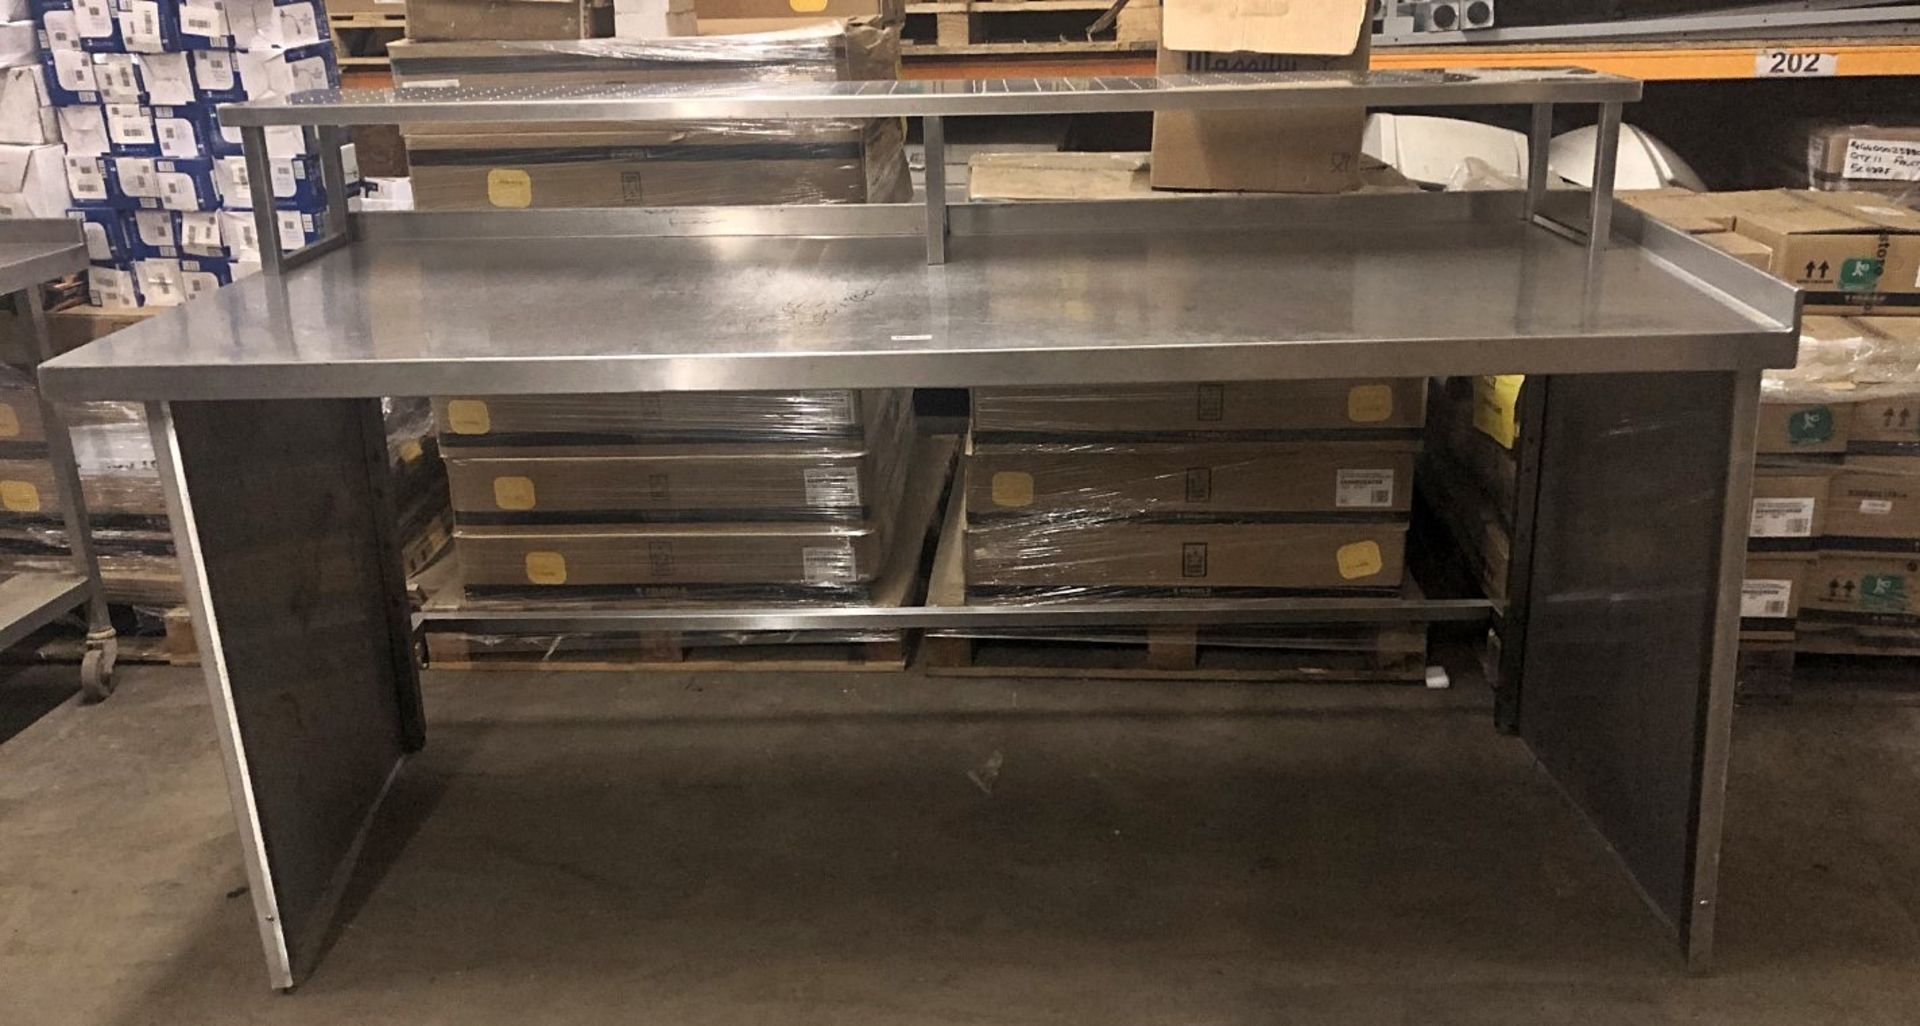 1 x Large Stainless Steel Table Unit - CL374 - NC265 - Location: Bolton BL1